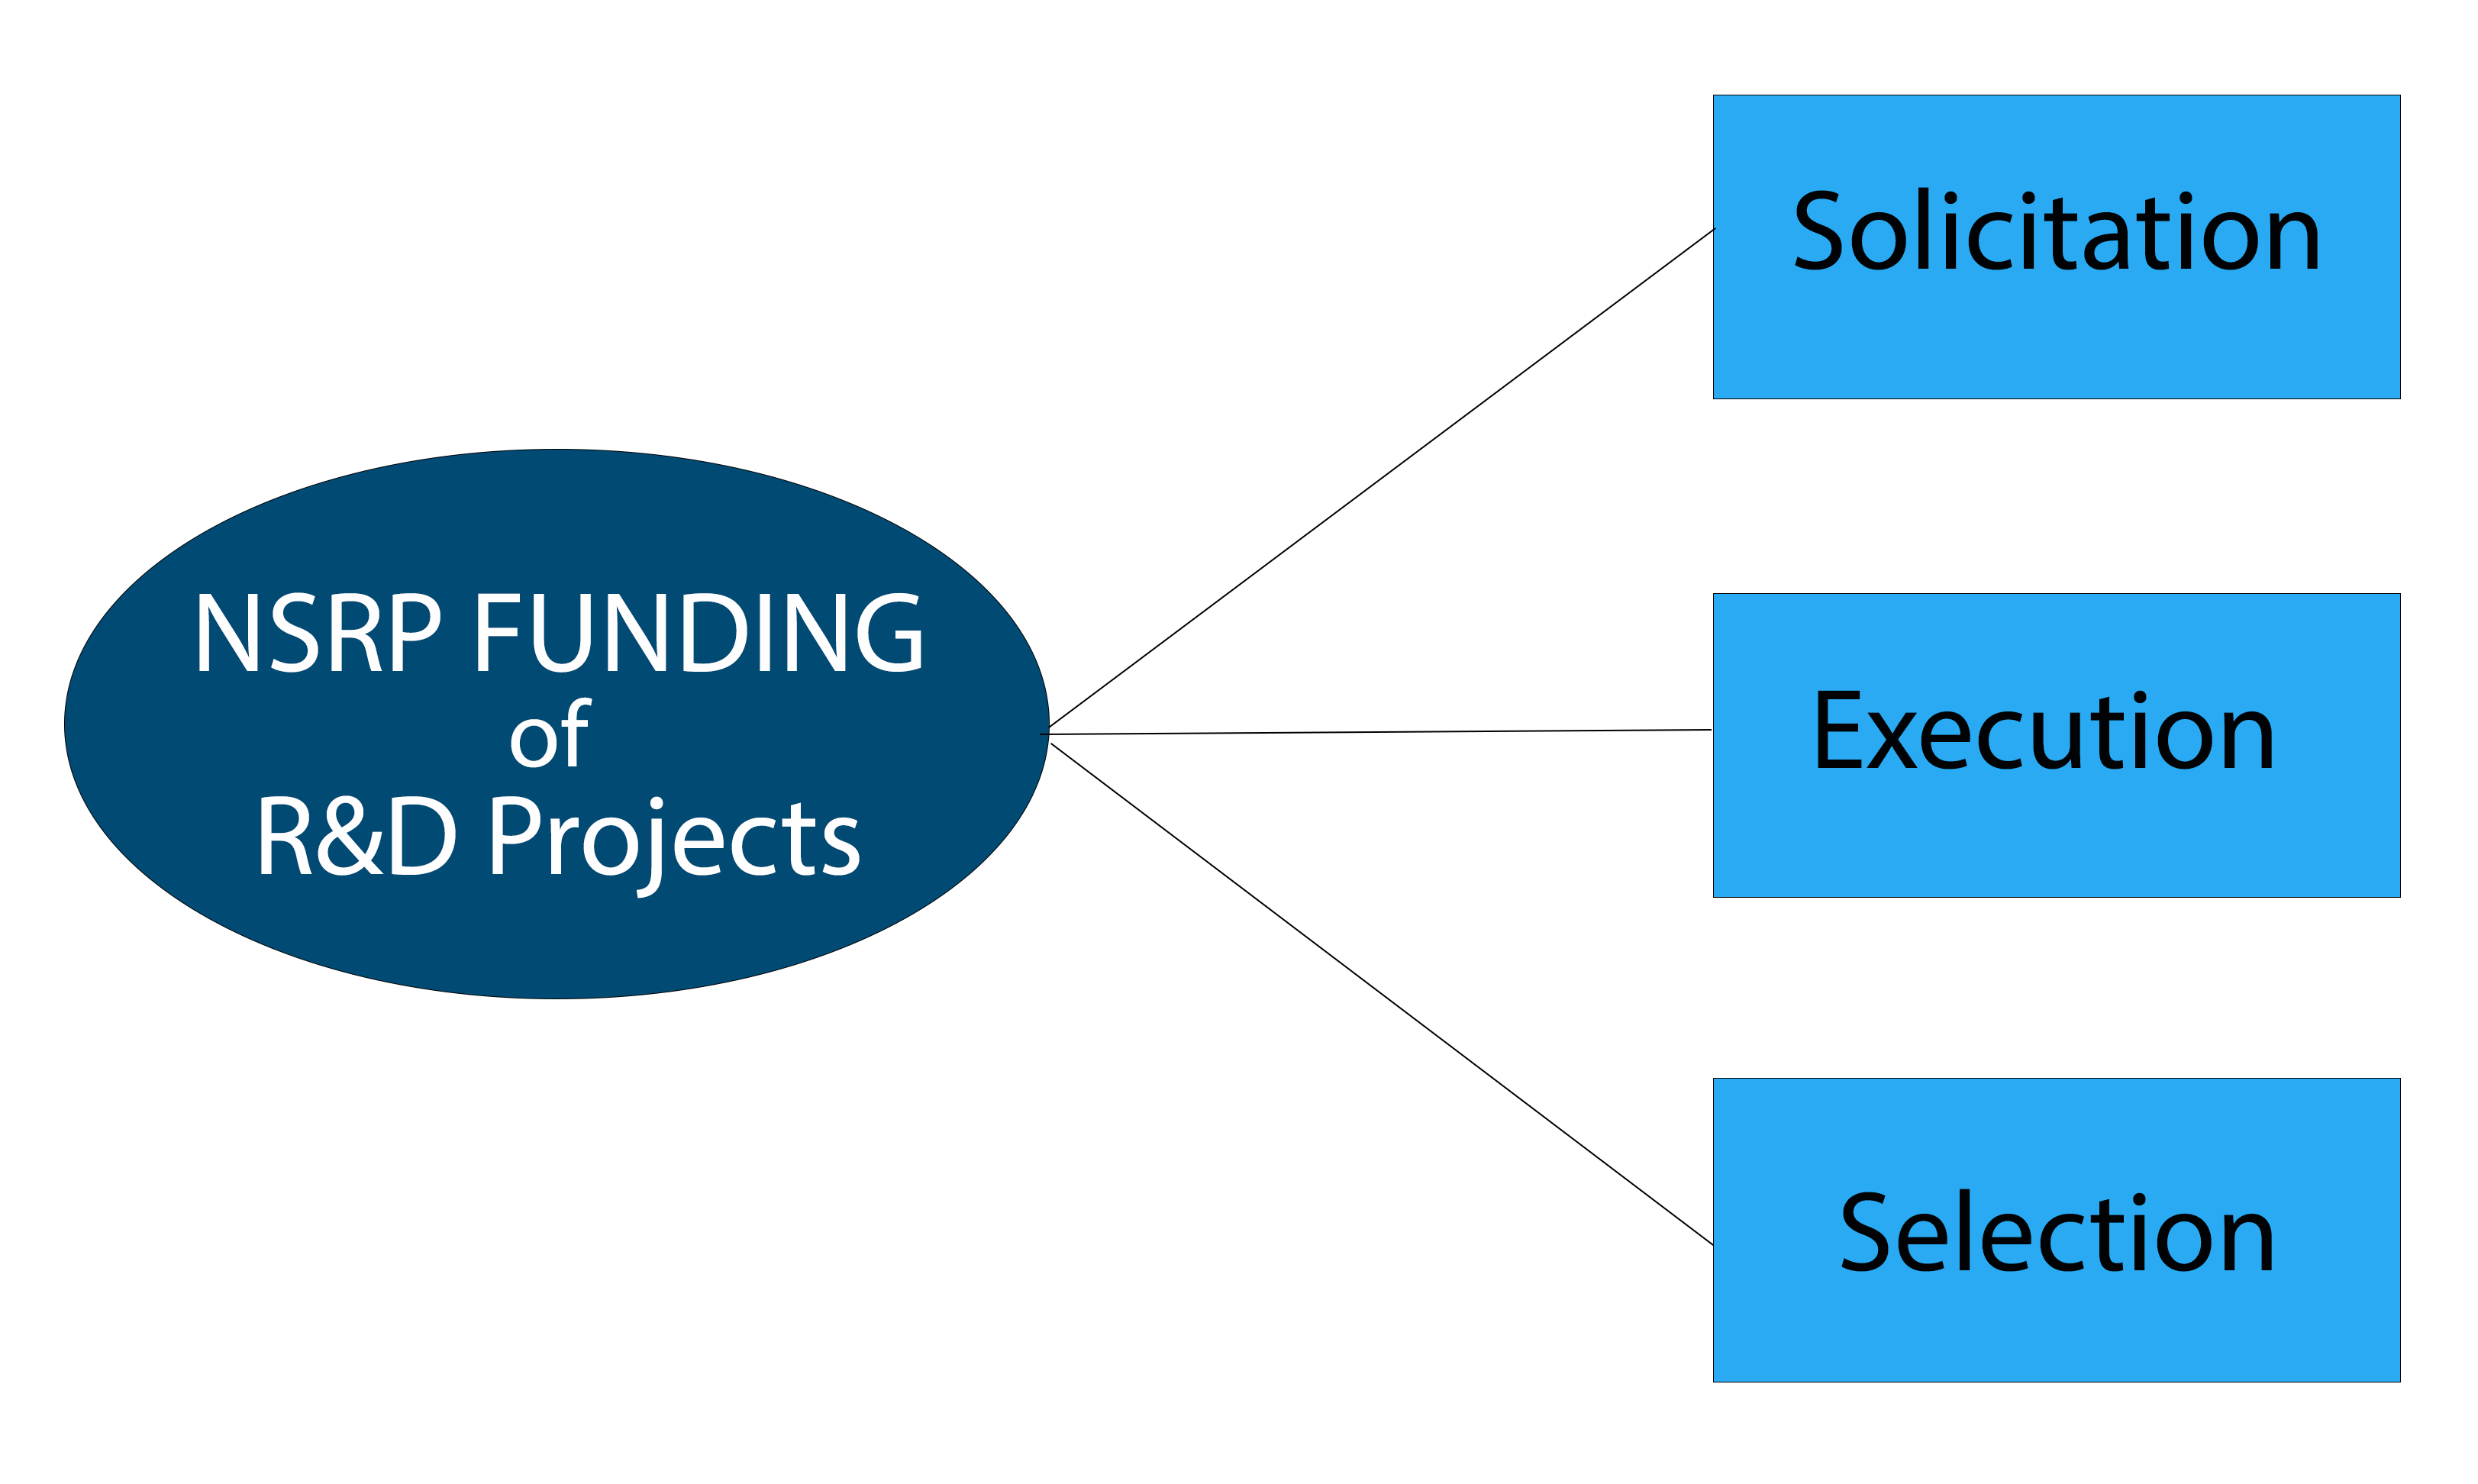 NSRP Funding of R&D Projects to Solicitation, Execution, and Selection